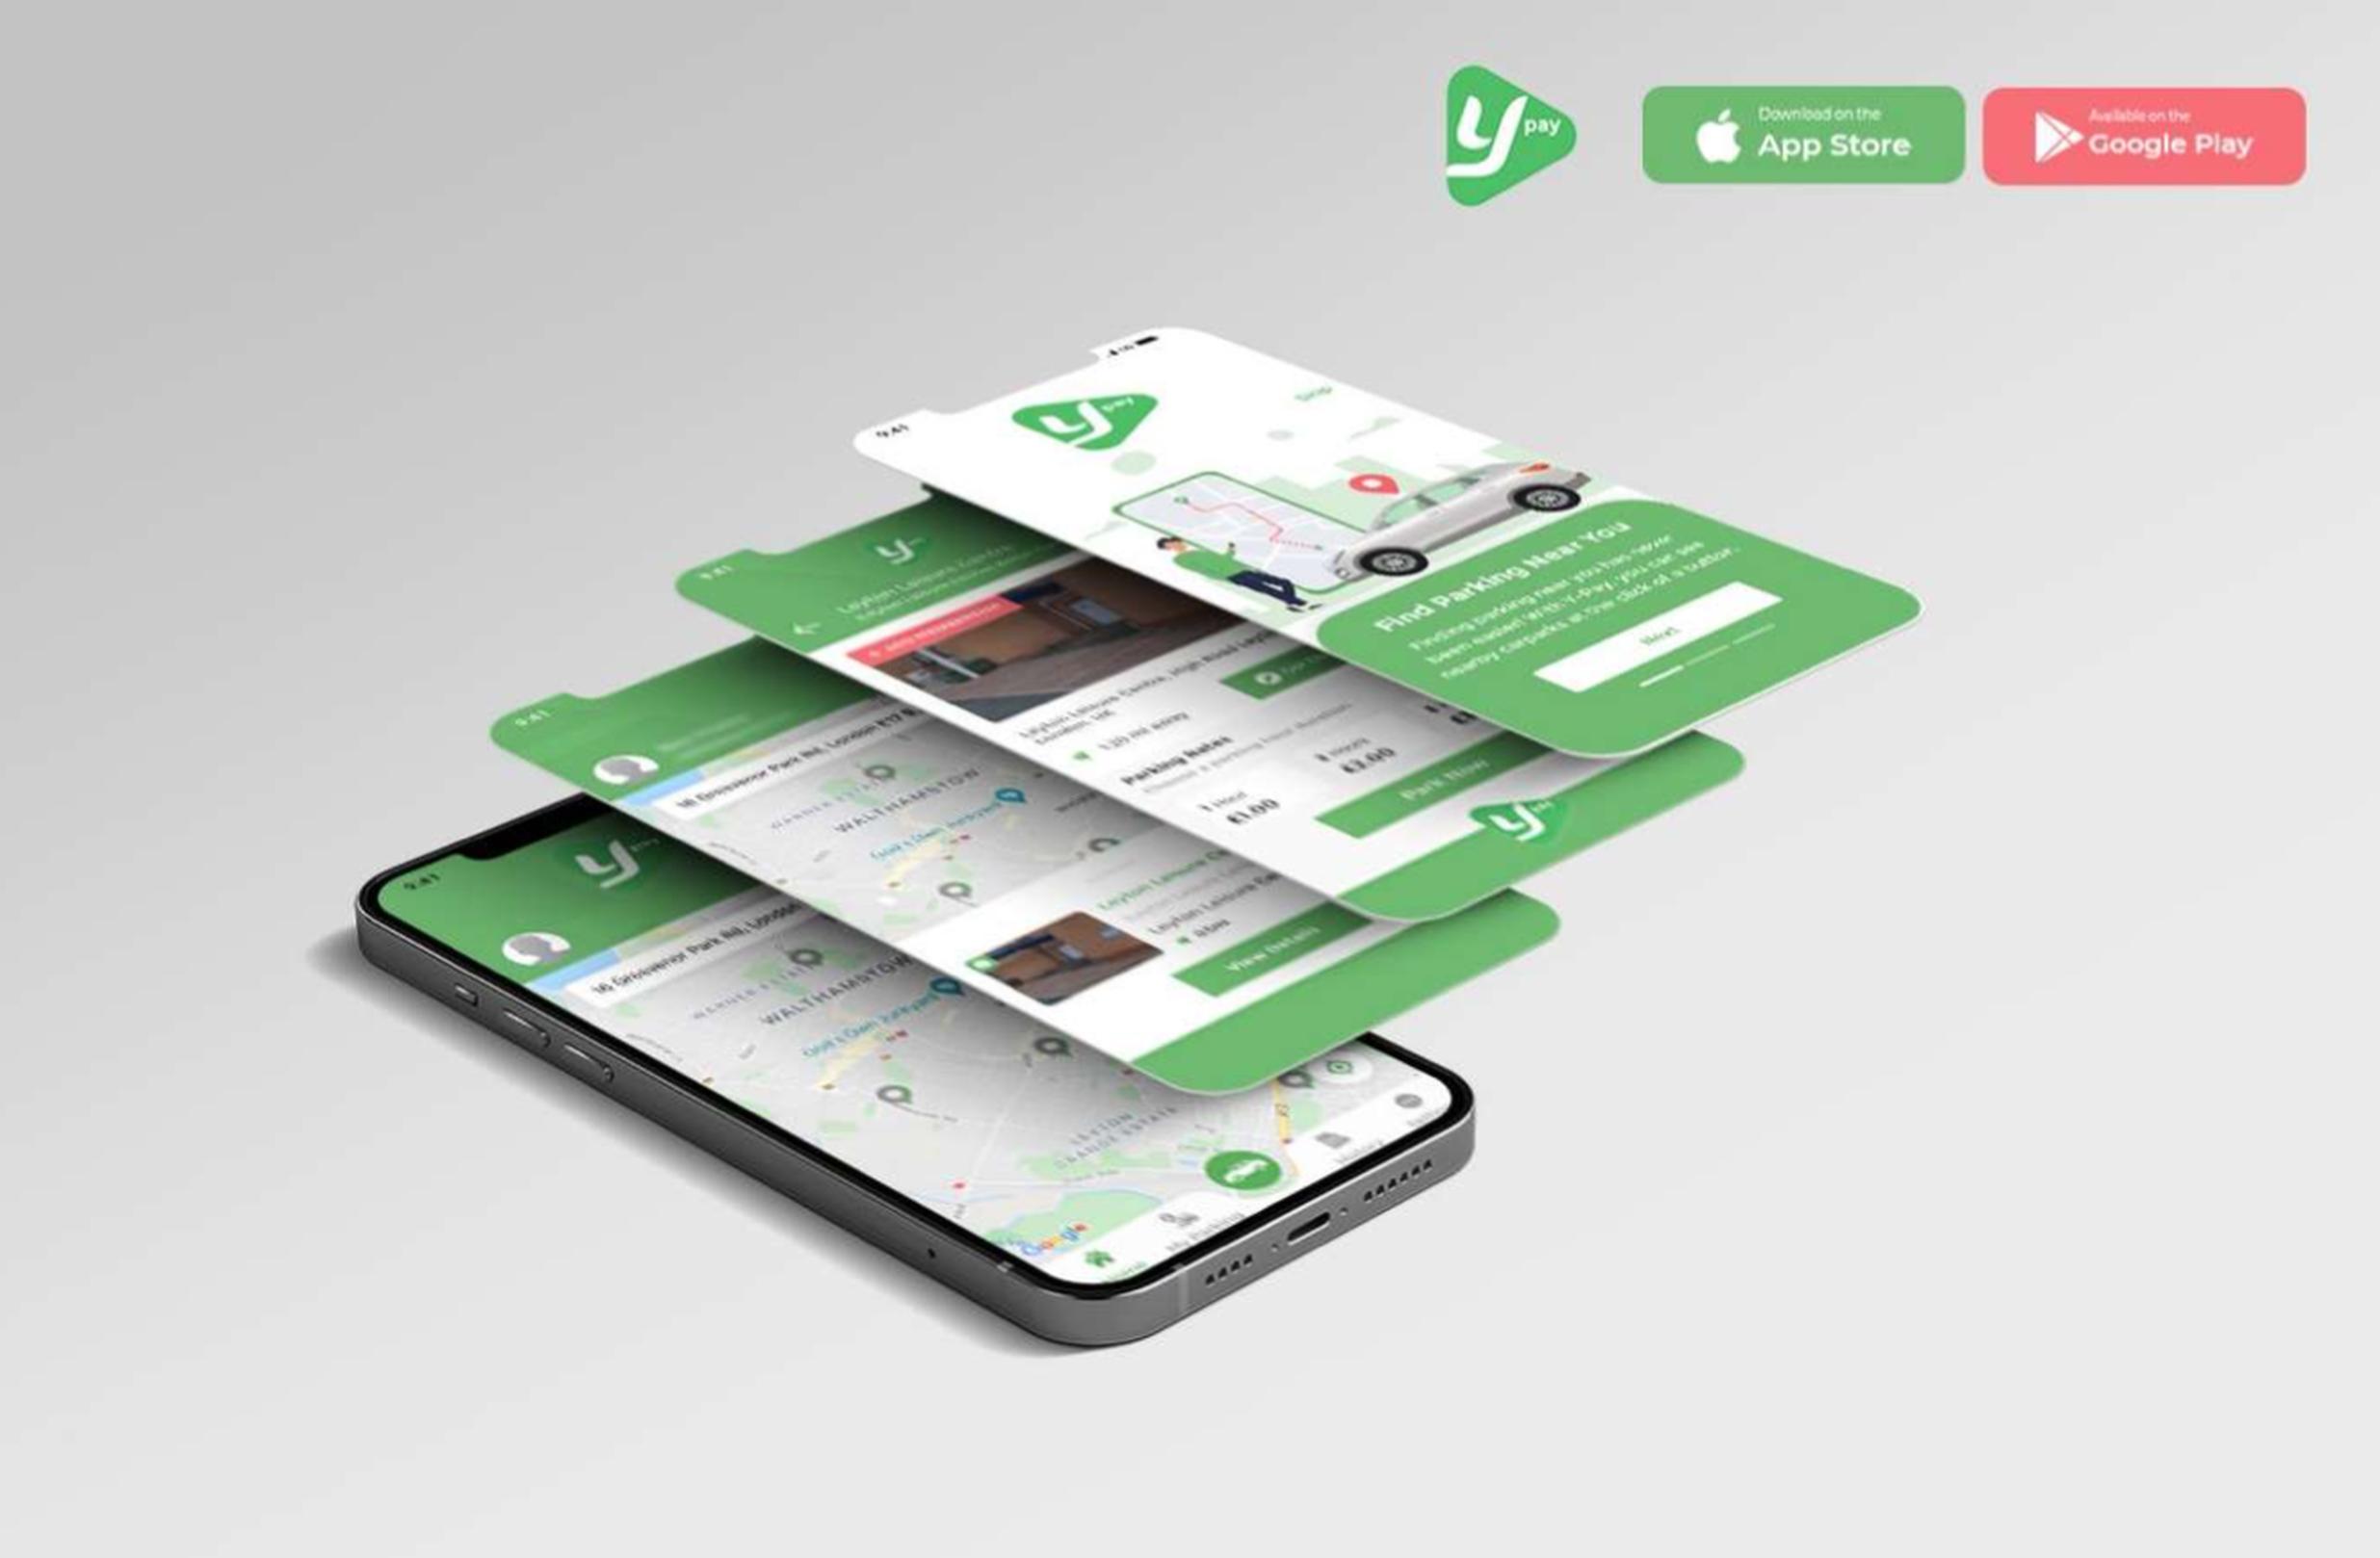 The Y-Pay app